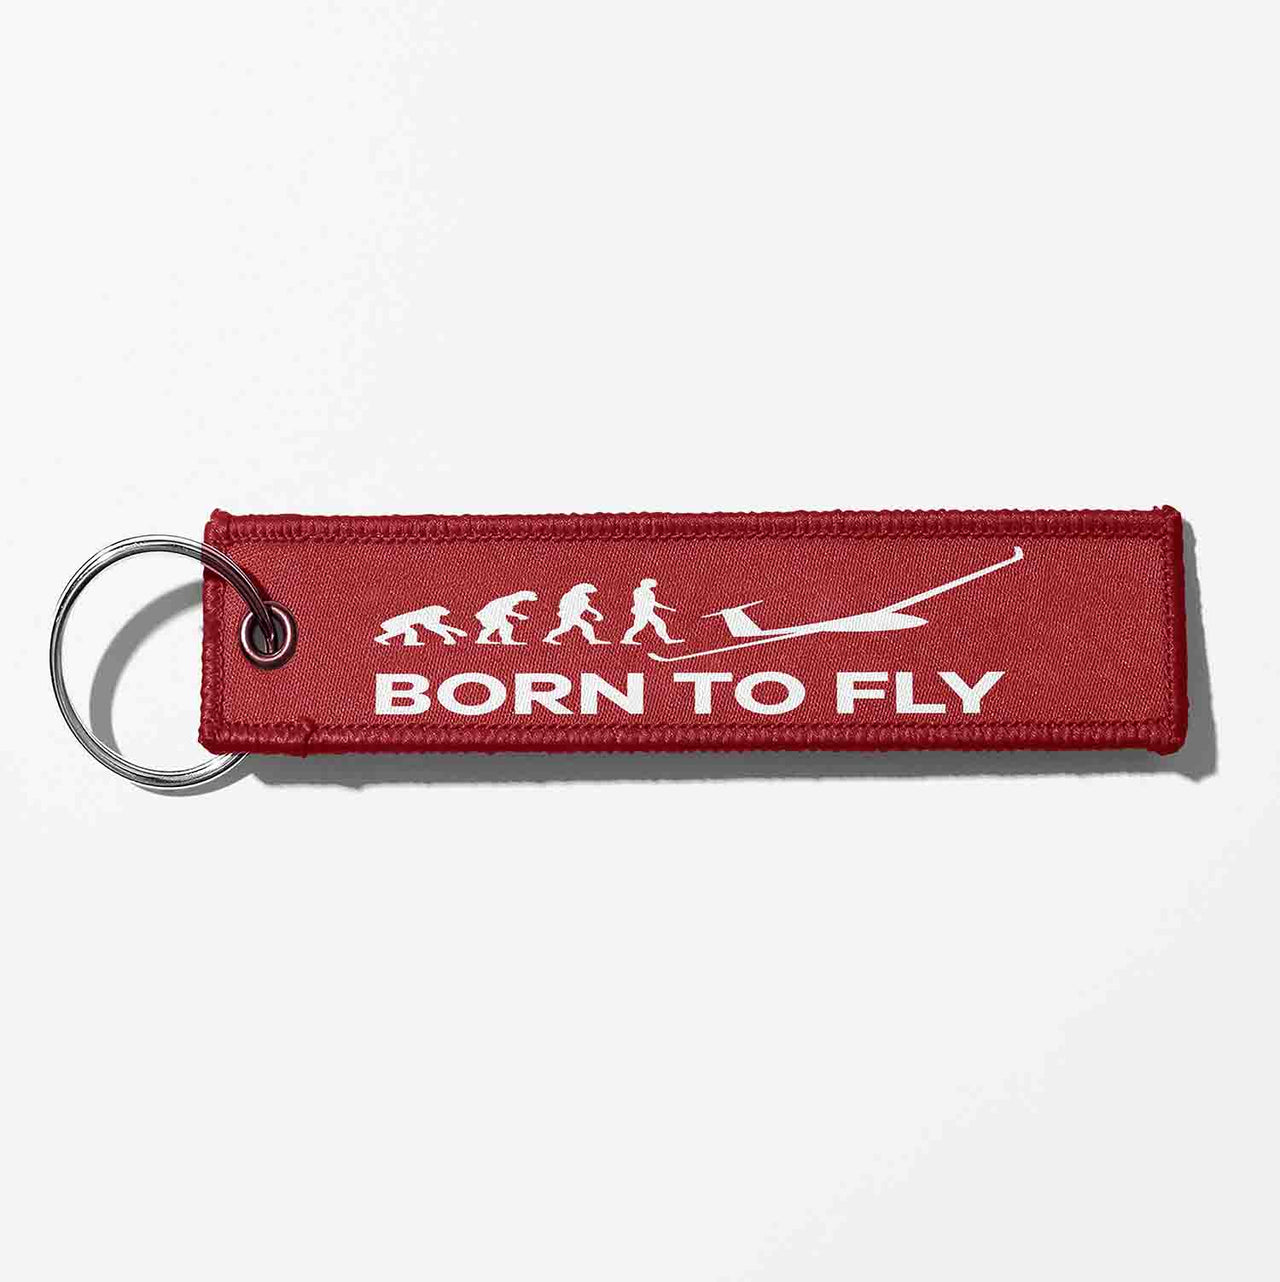 Born To Fly (Glider) Designed Key Chains